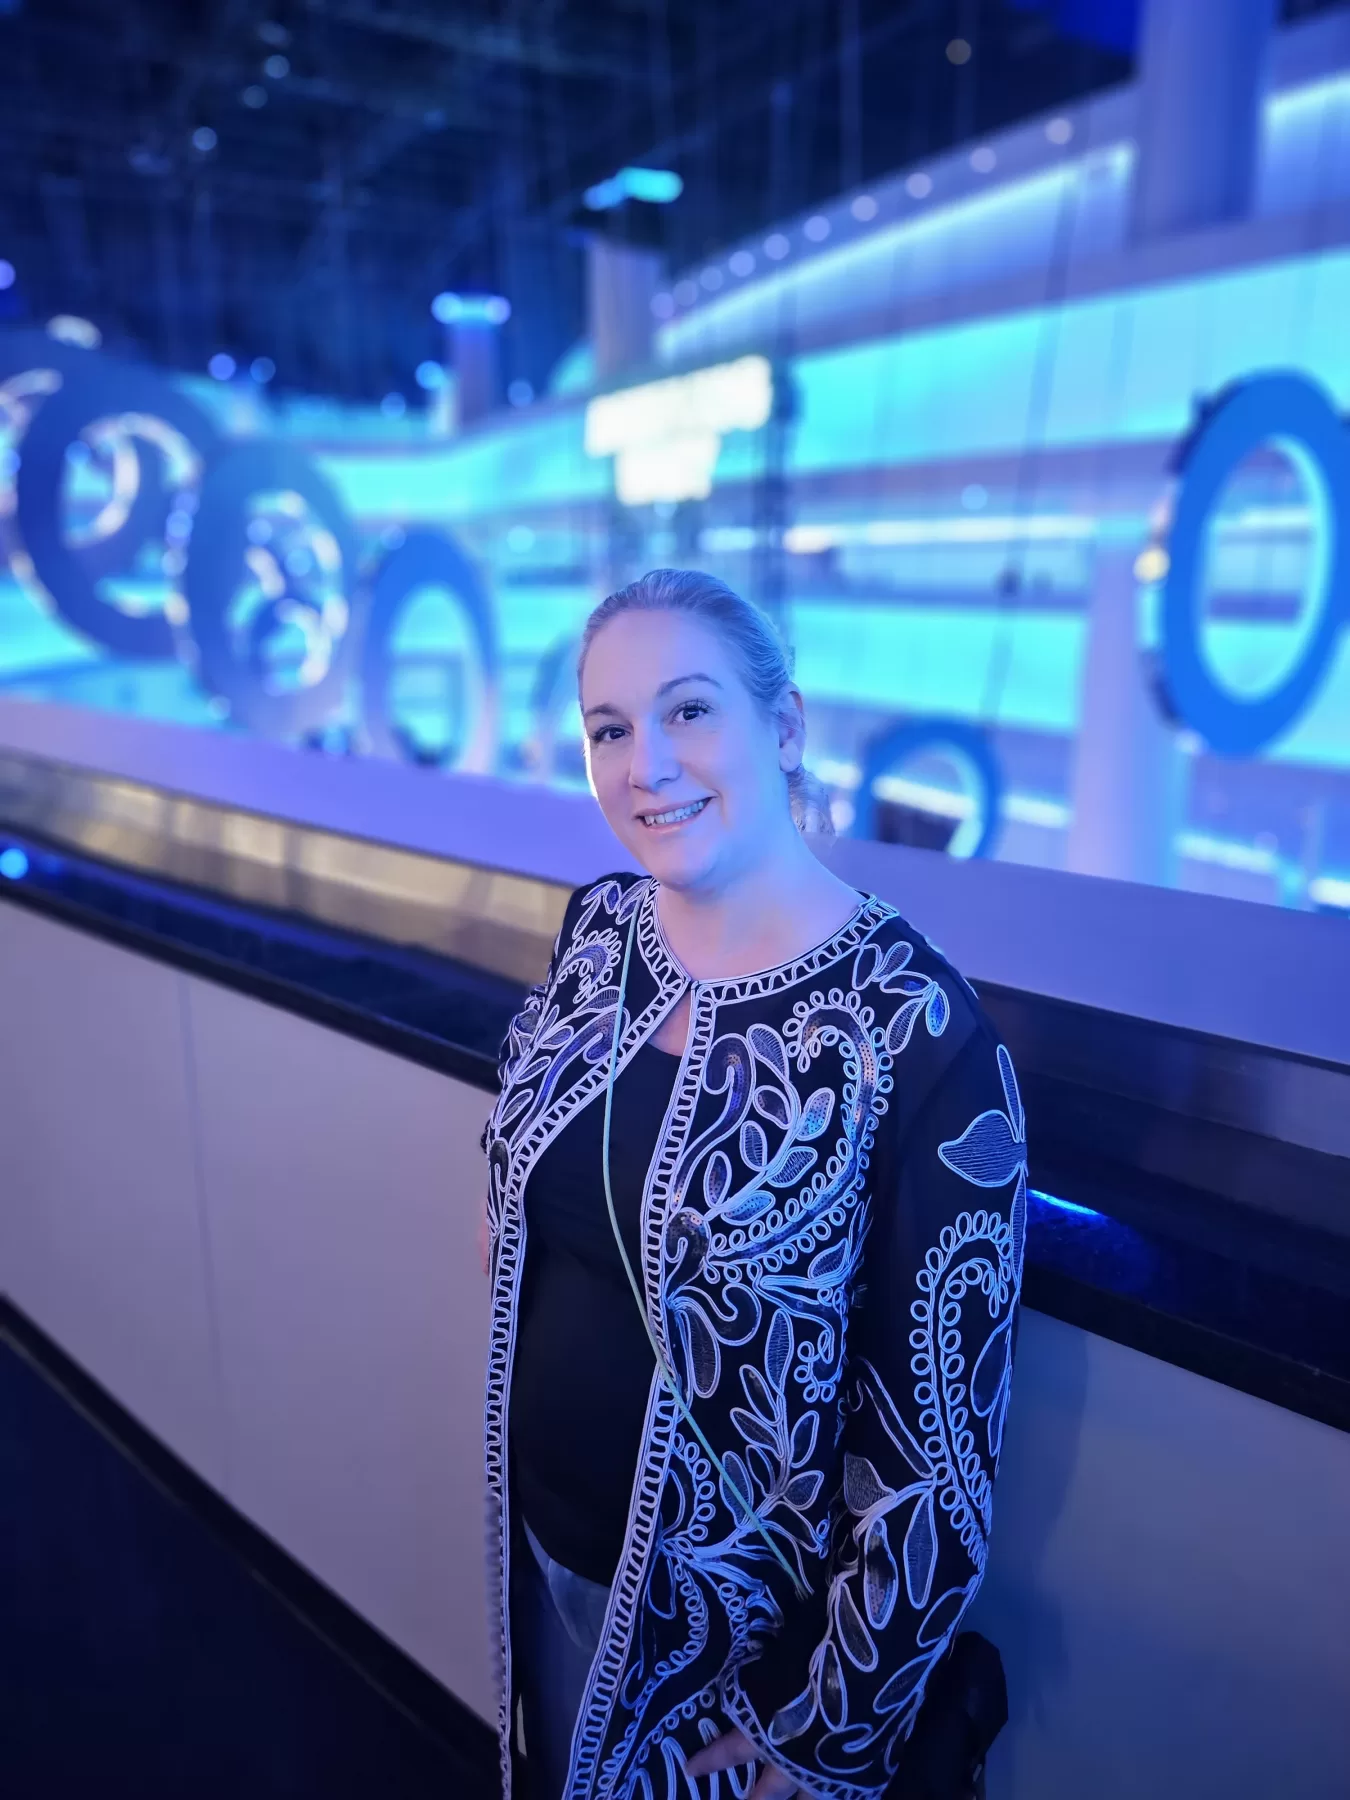 Midlife Travel Blogger Kathy Brown stands along the rail in the futuristic Las Vegas Sphere venue before the U2 concert.